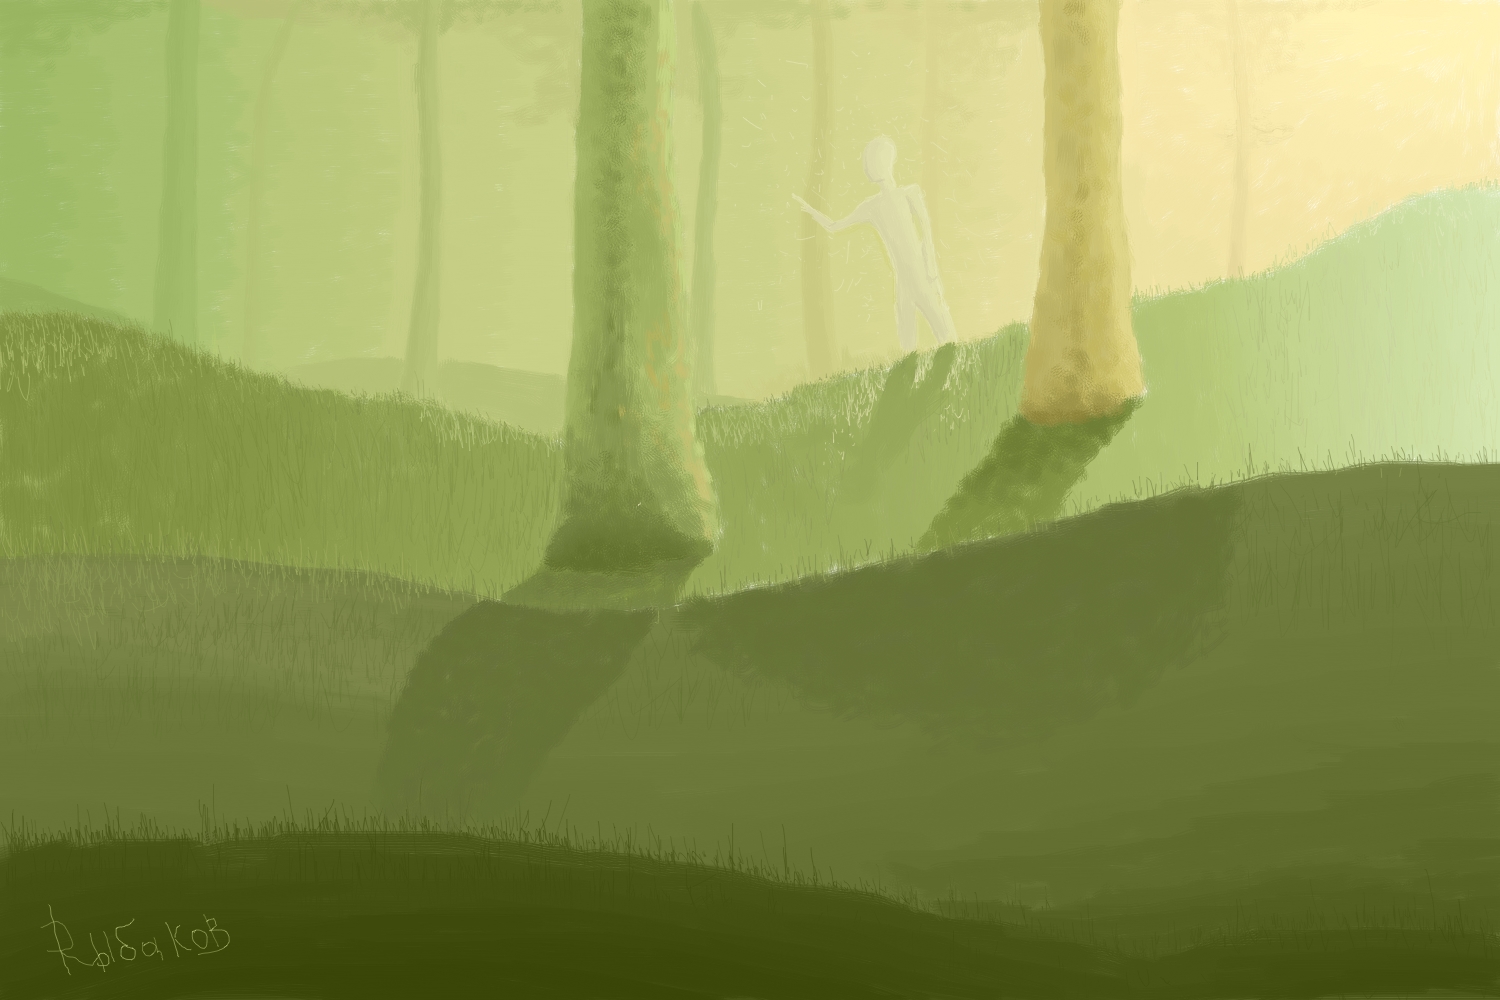 The forest